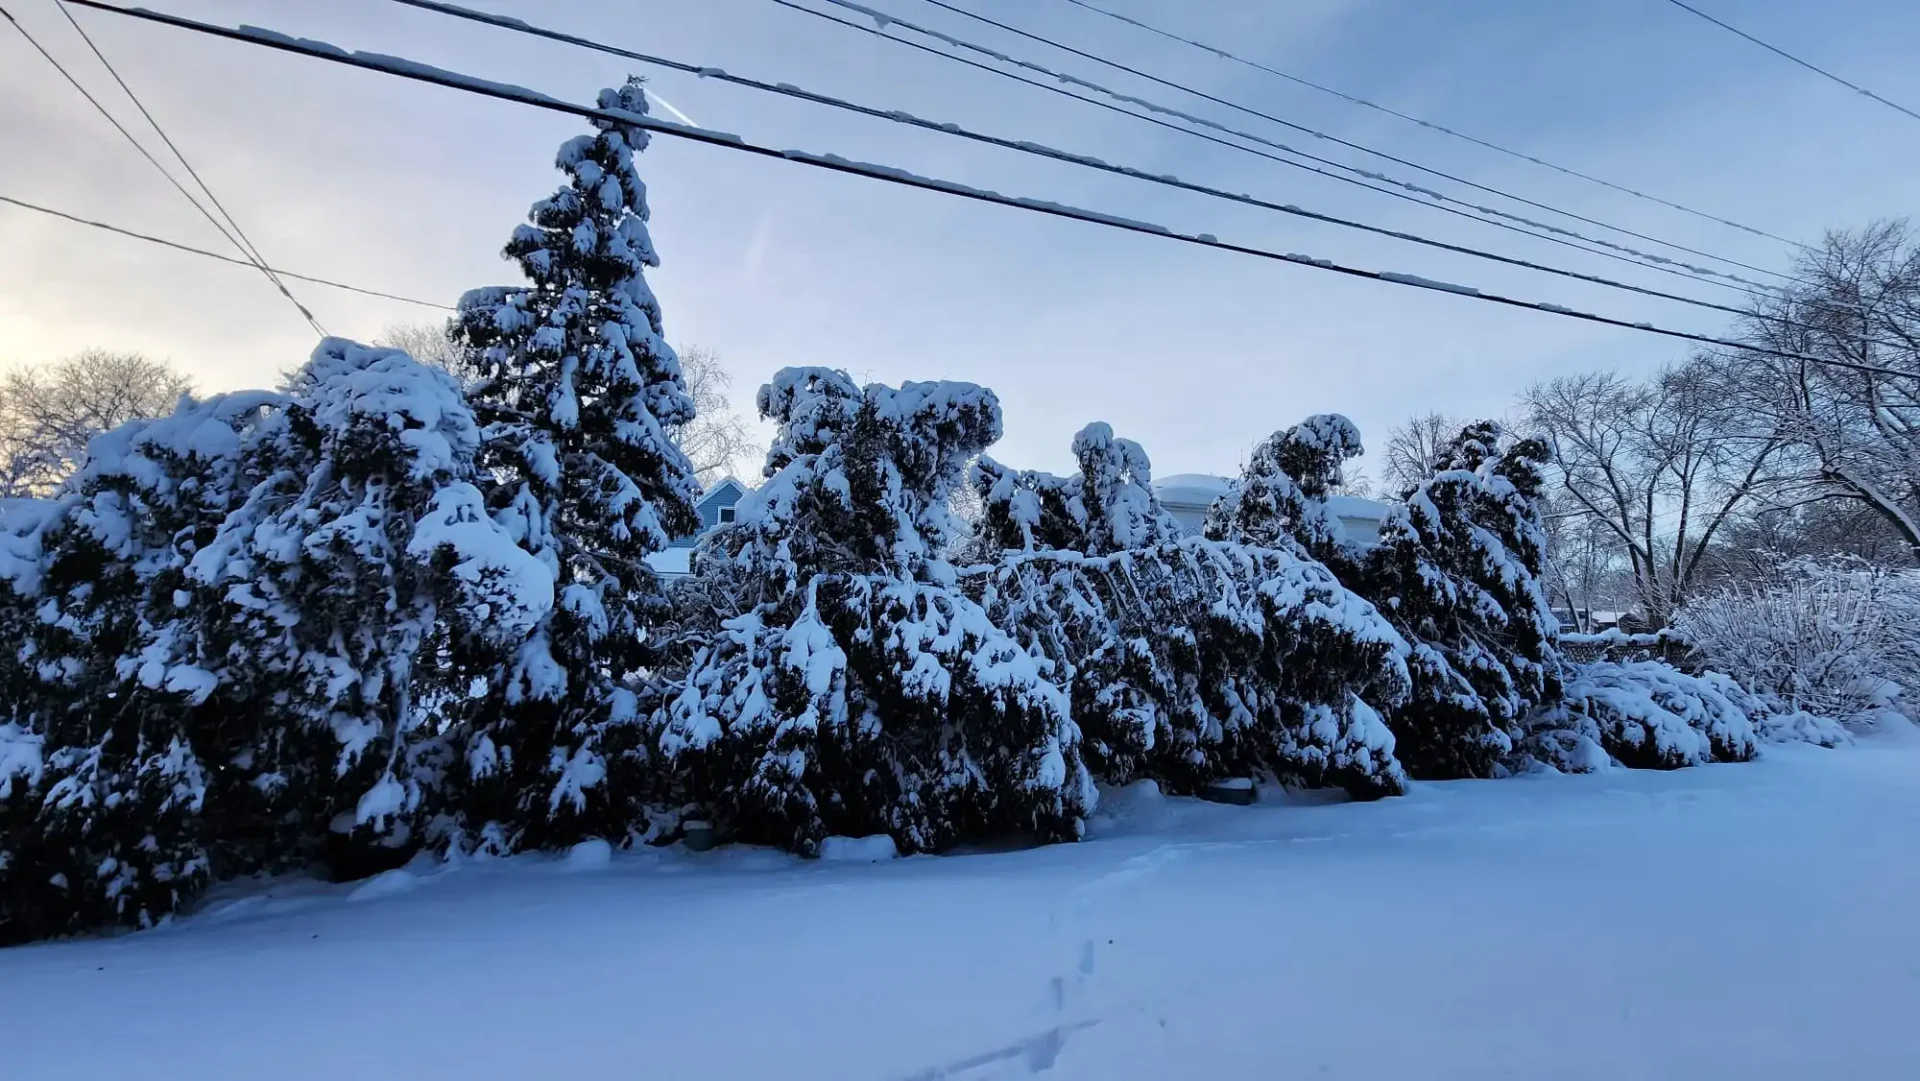 A winter scene with heavily snow-laden evergreen trees, power lines above, and a blanket of undisturbed snow covering the ground during twilight hours.